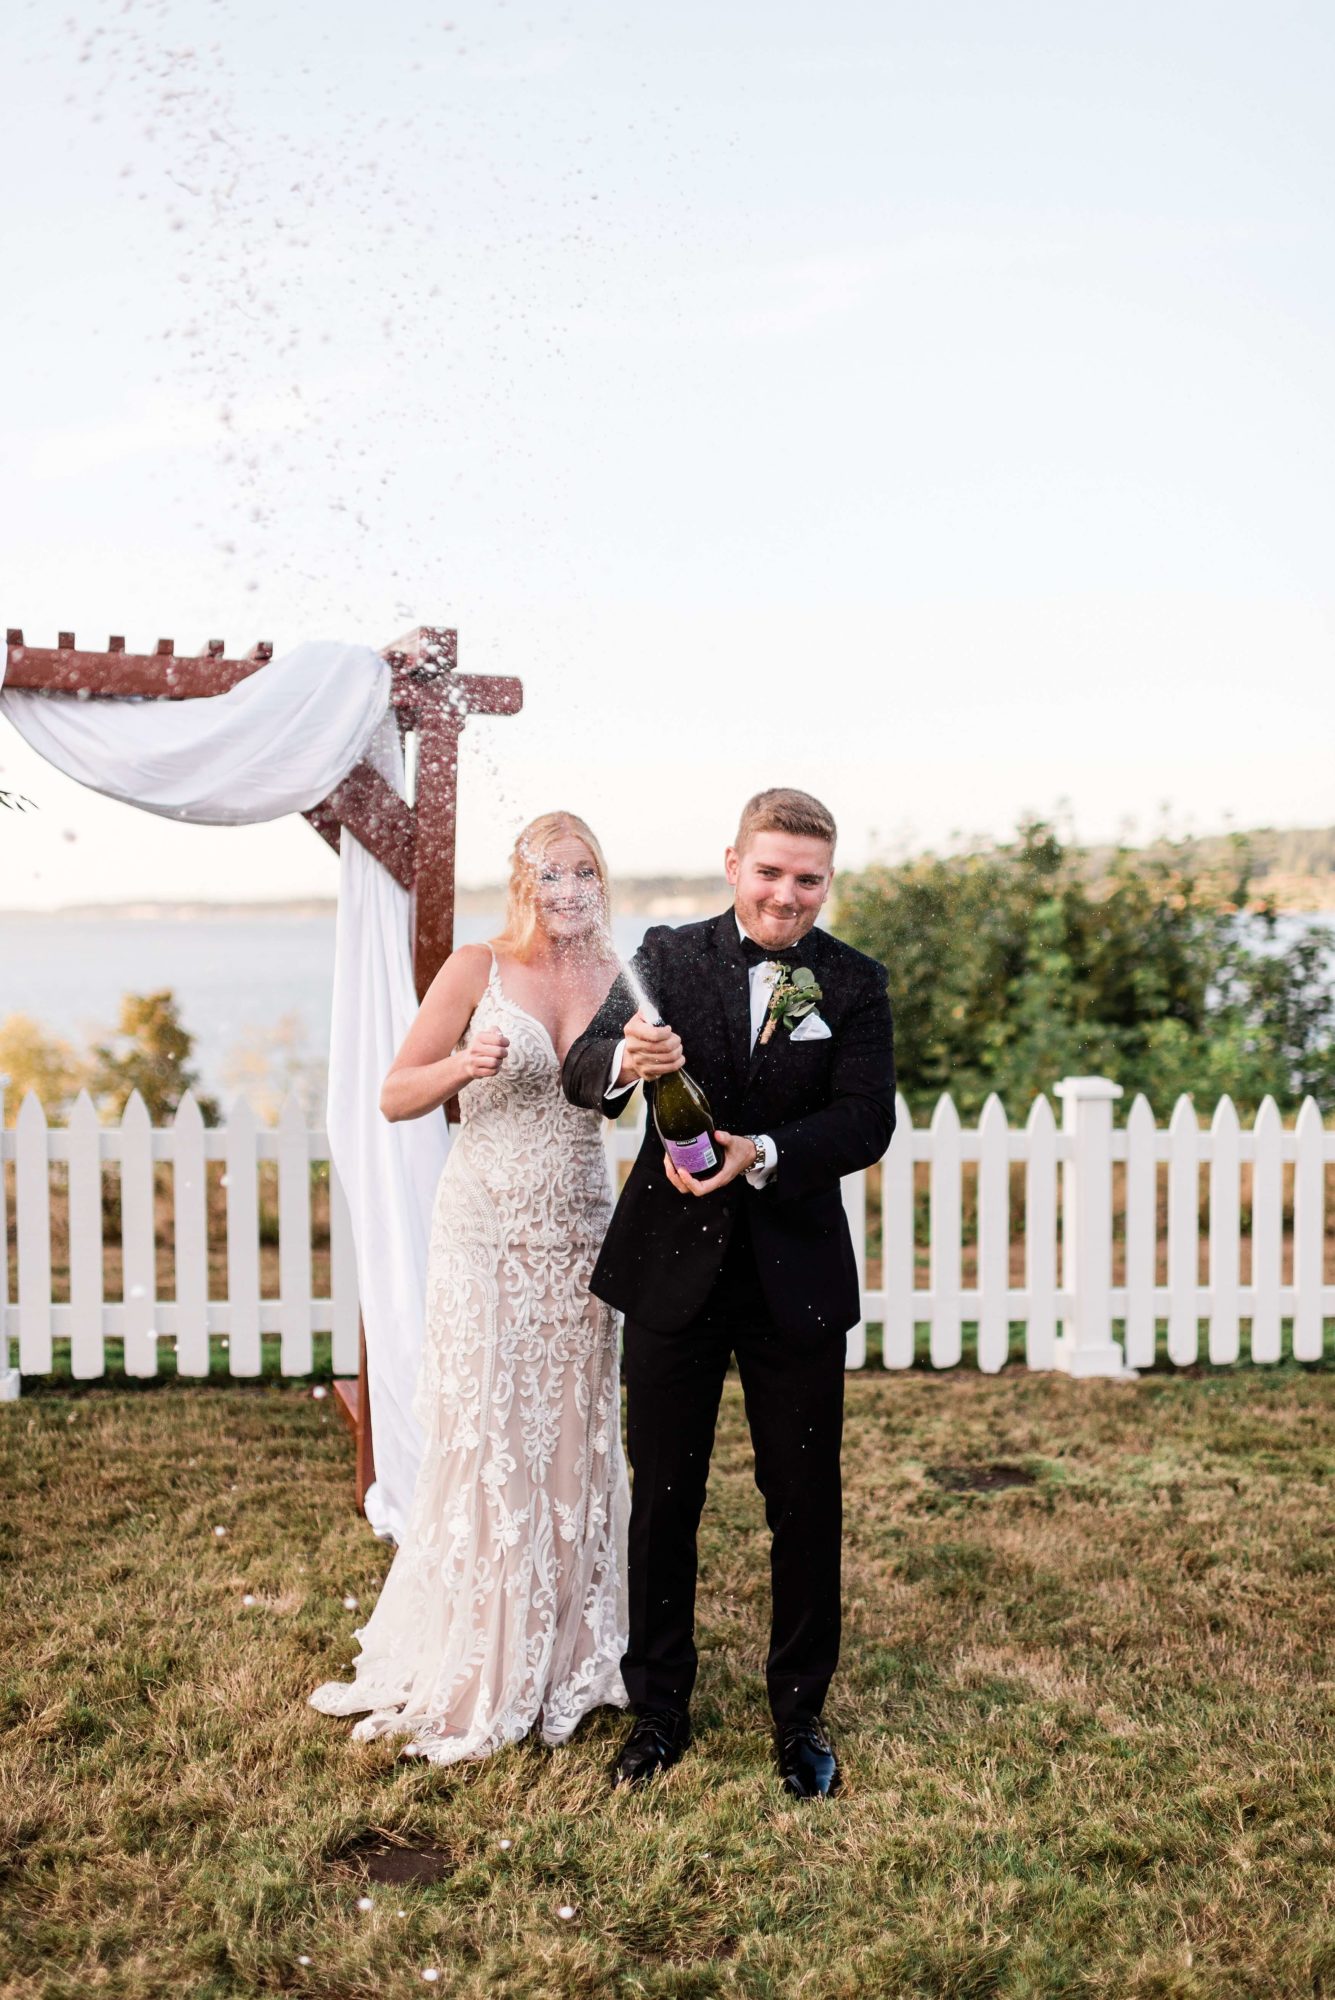 Sunset photos of Bride and Groom at Port Gamble Wedding Venue